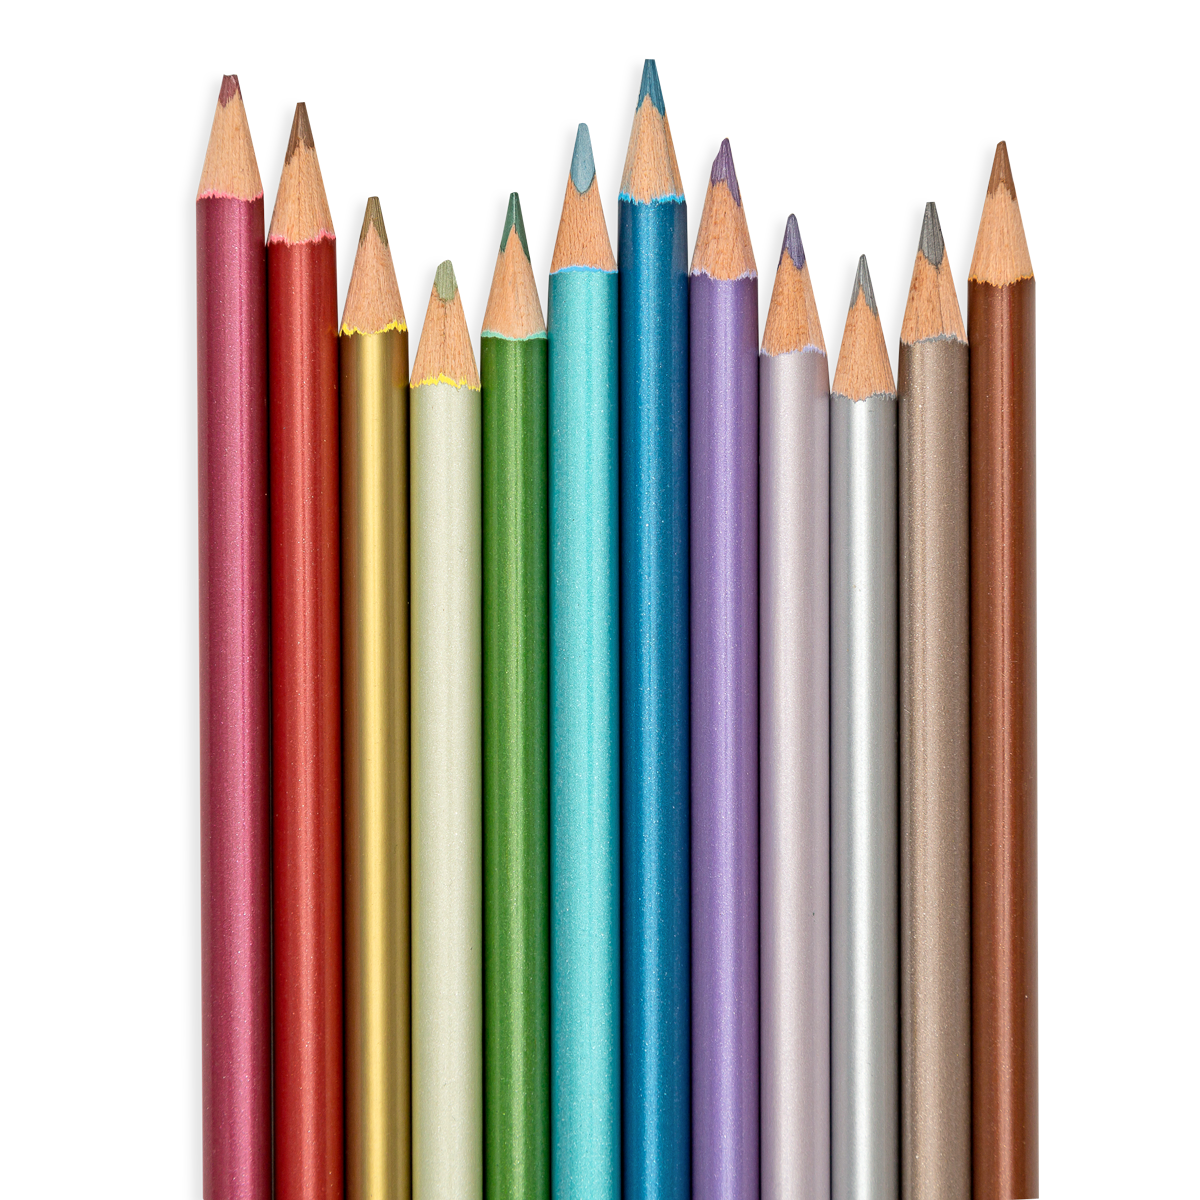 OOLY Modern Metallics Colored Pencils Colored Pencils